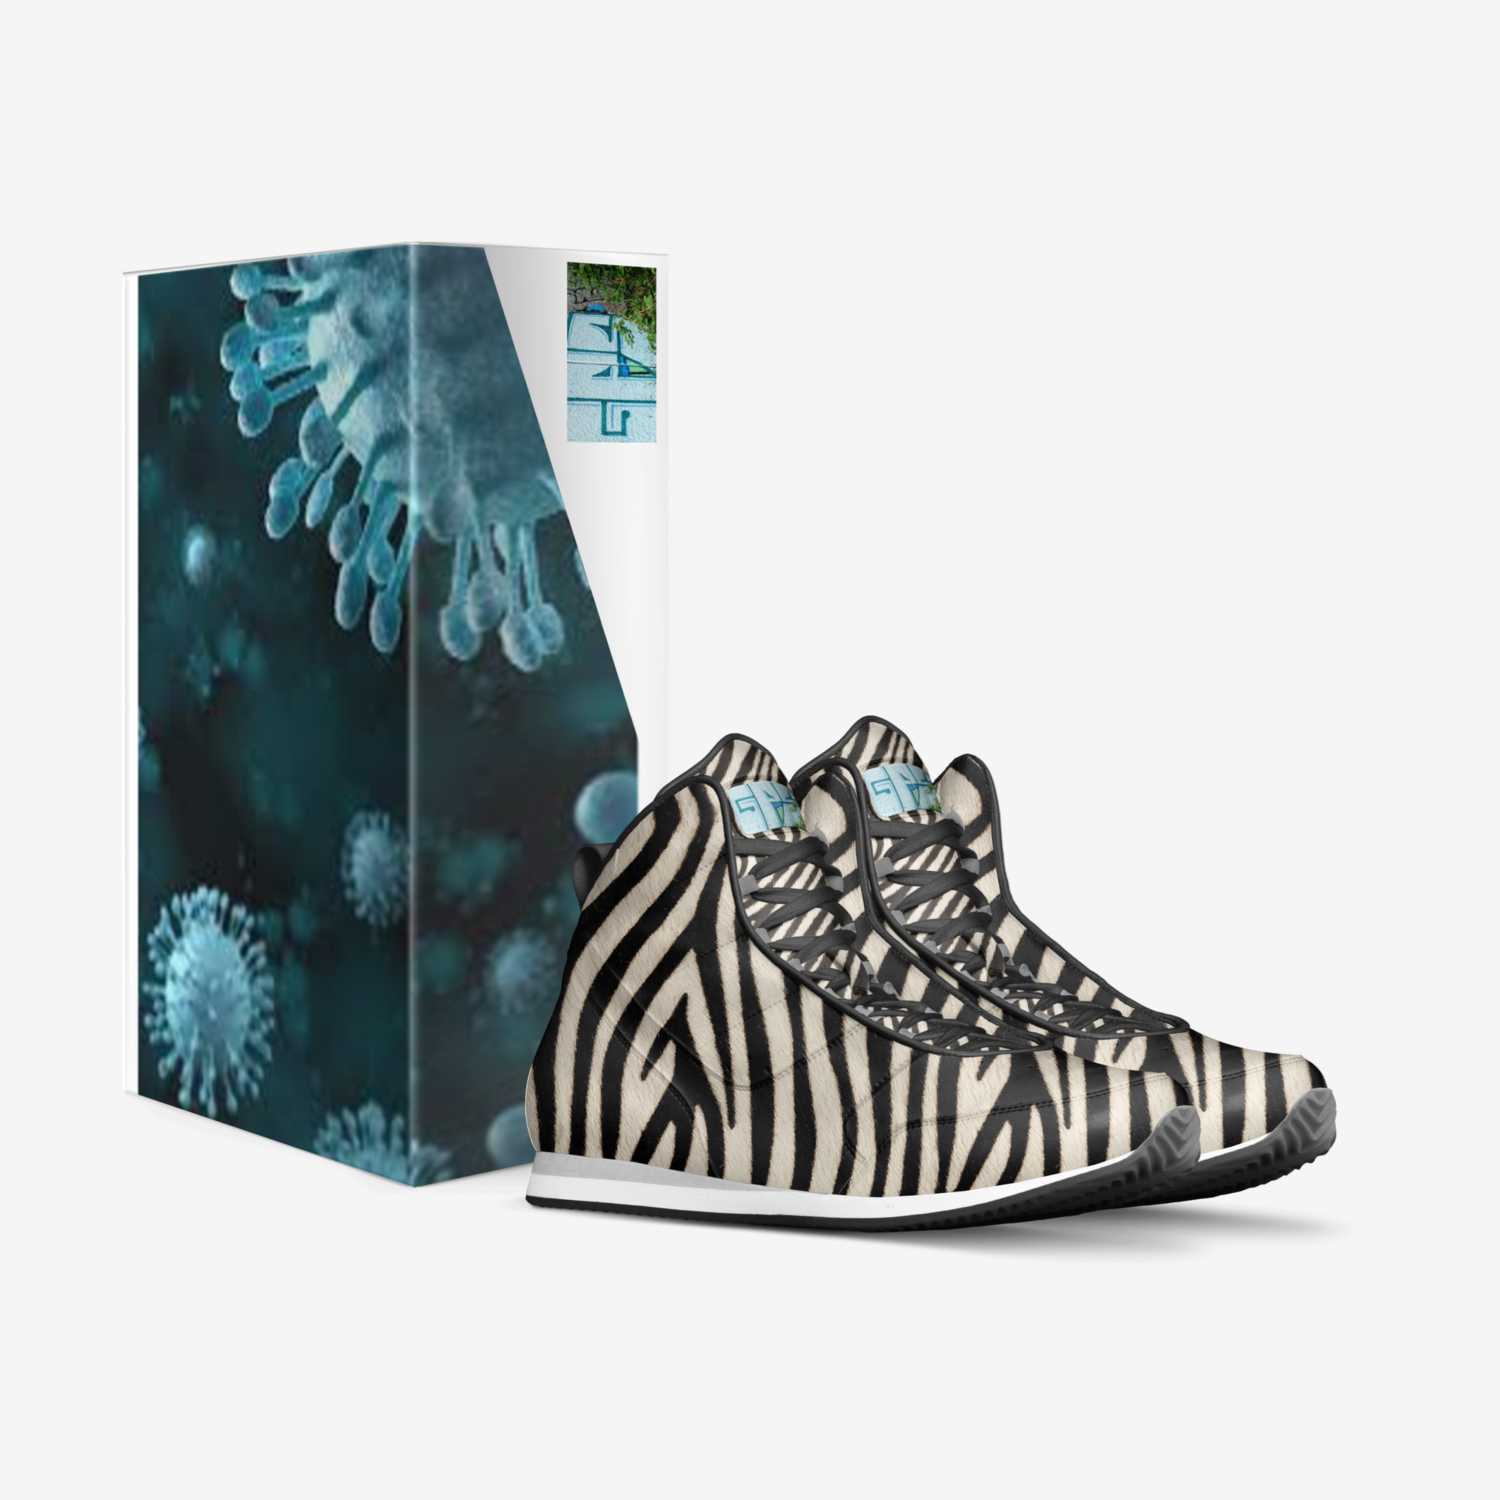 Zoombie Quarantine custom made in Italy shoes by Gps Gregory Paul Smith | Box view